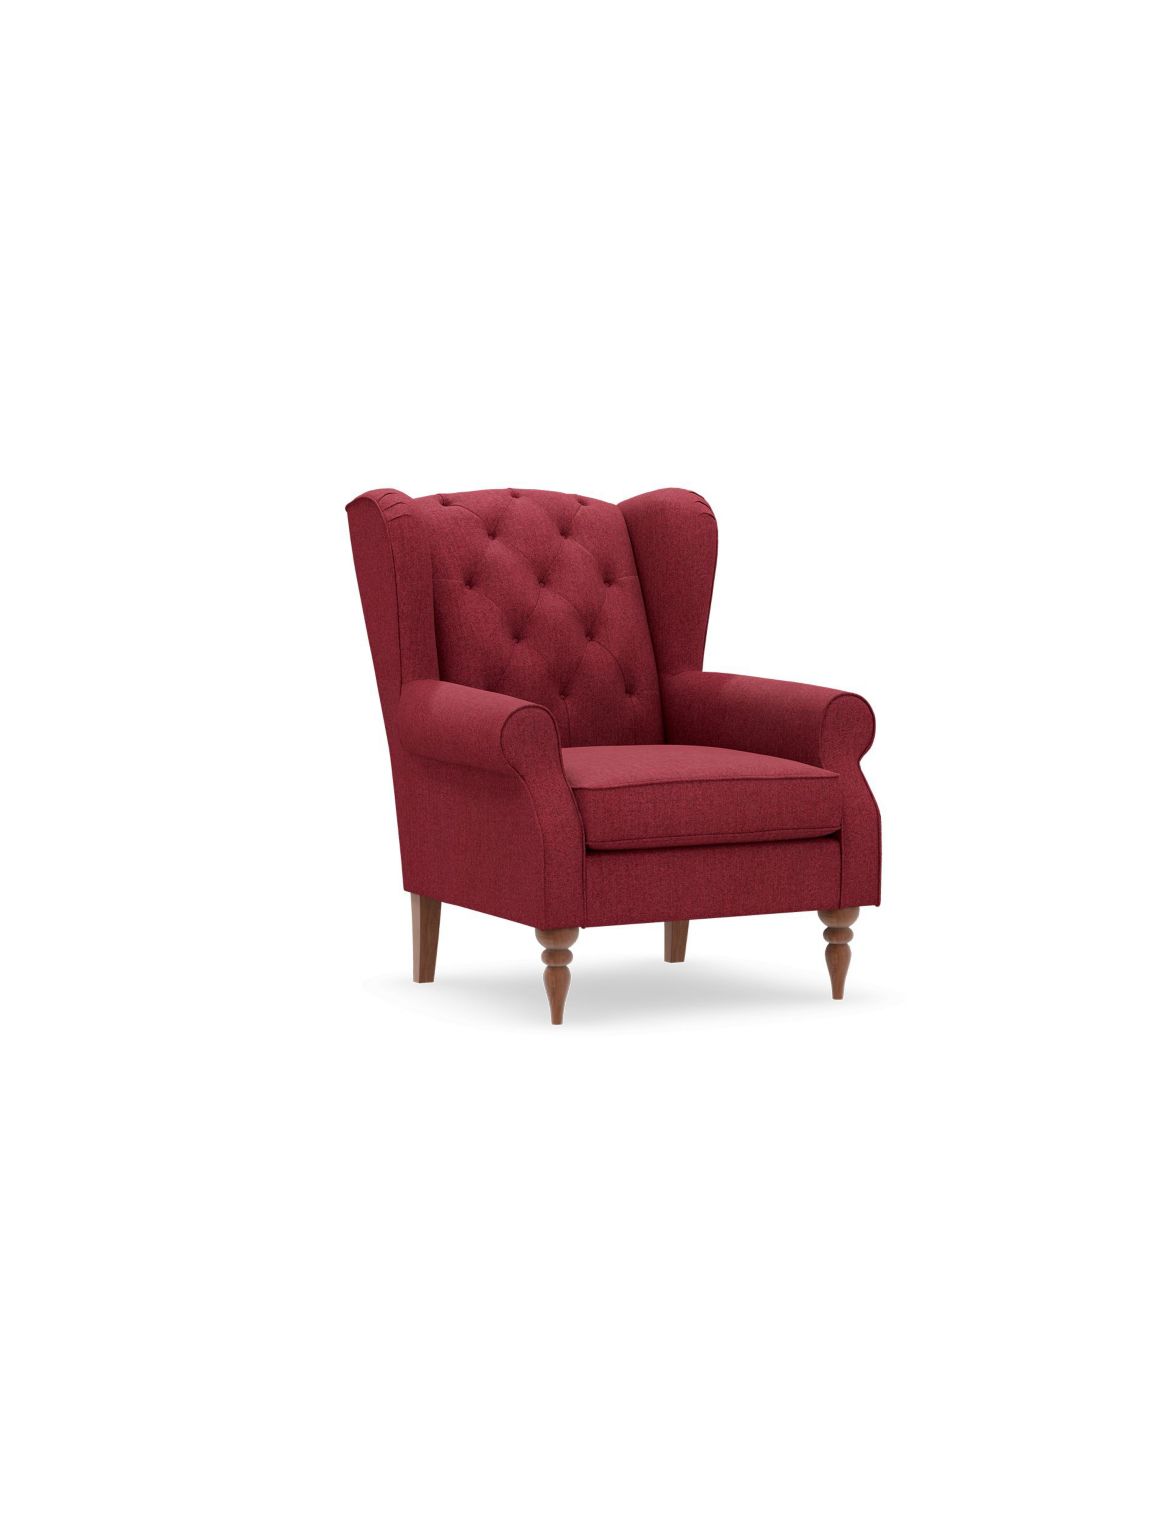 Highland Button Small Armchair red